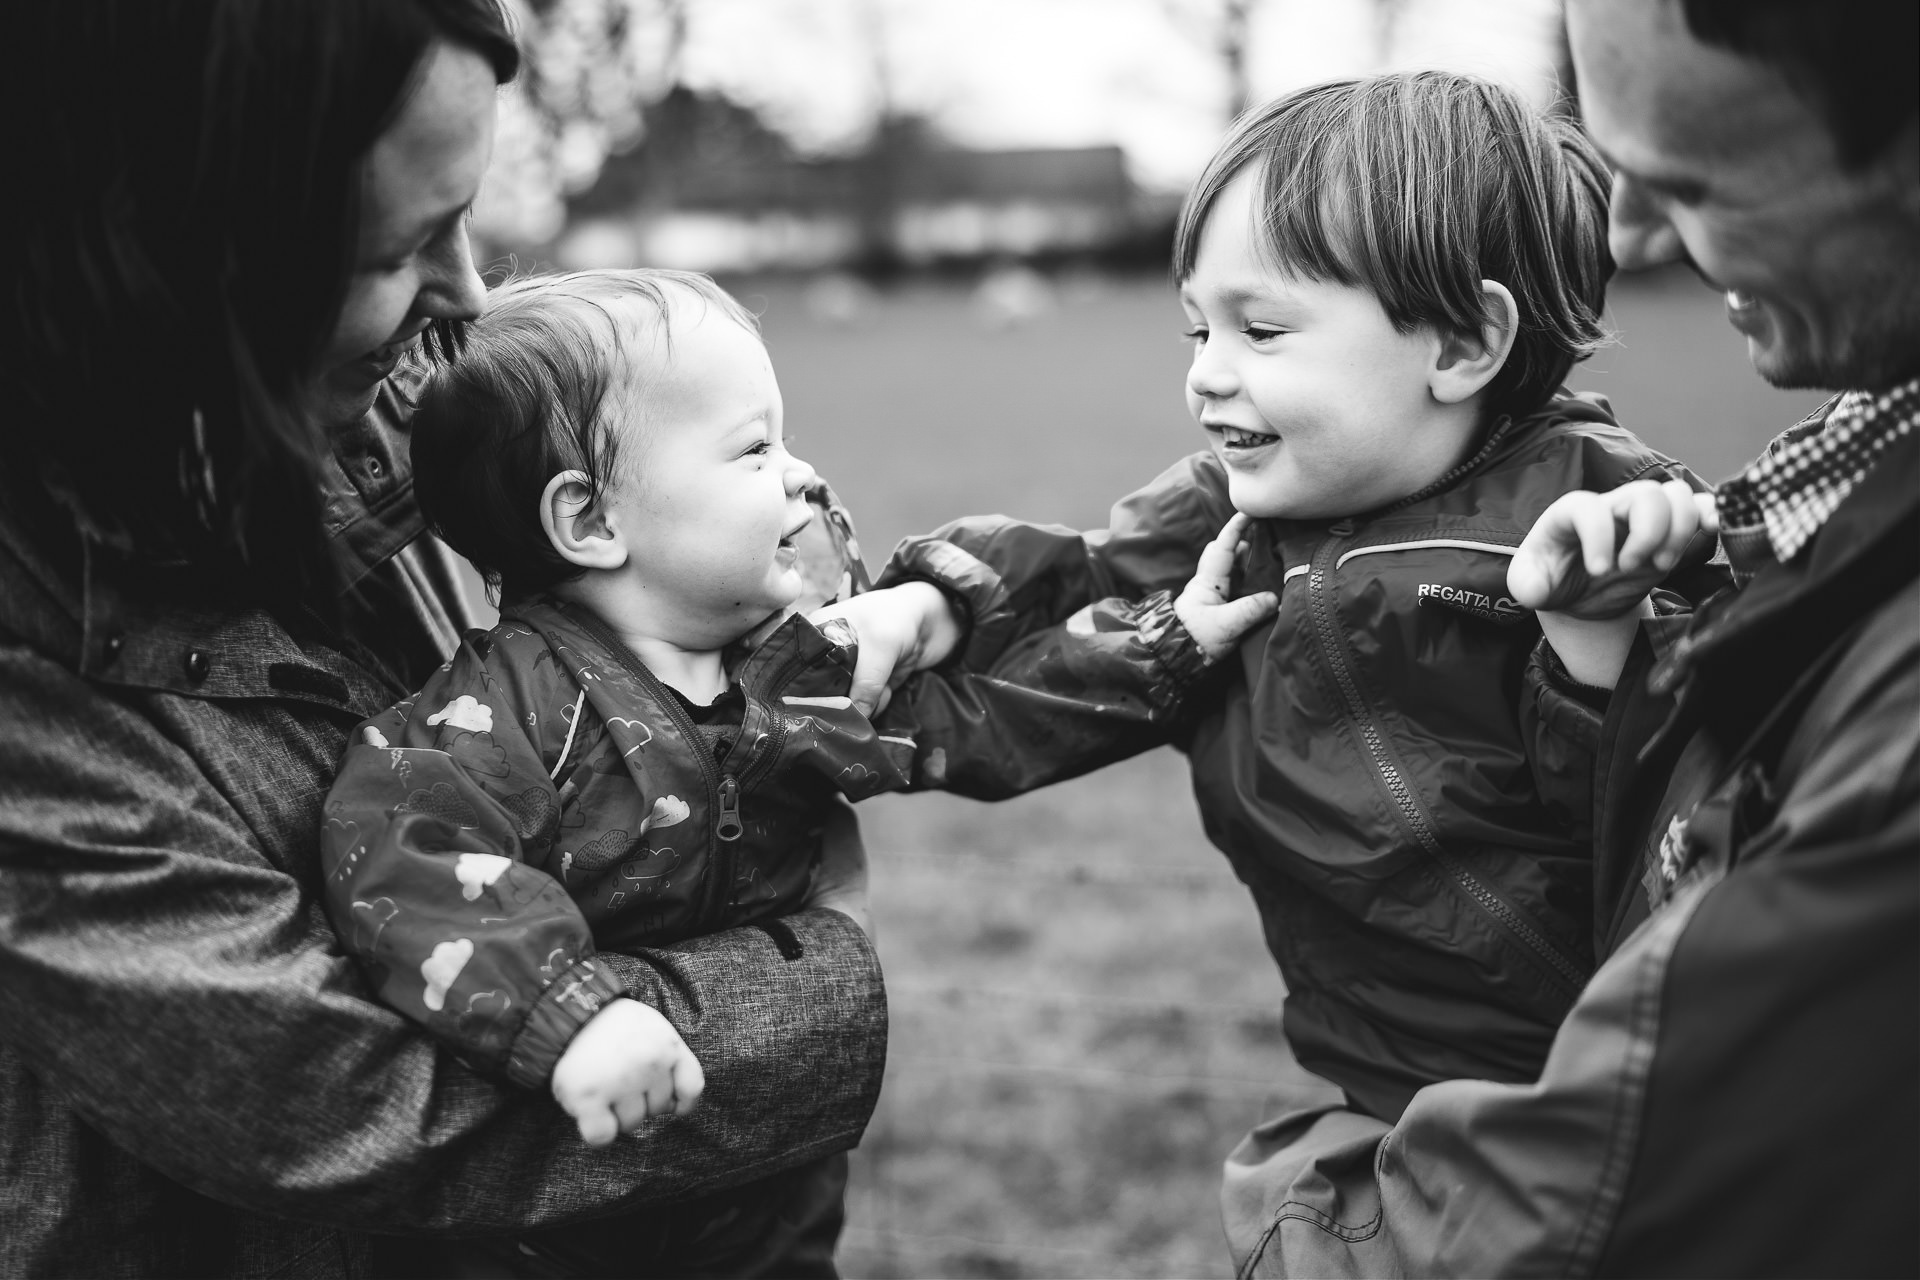 Two young brothers laughing together in their parents' arms